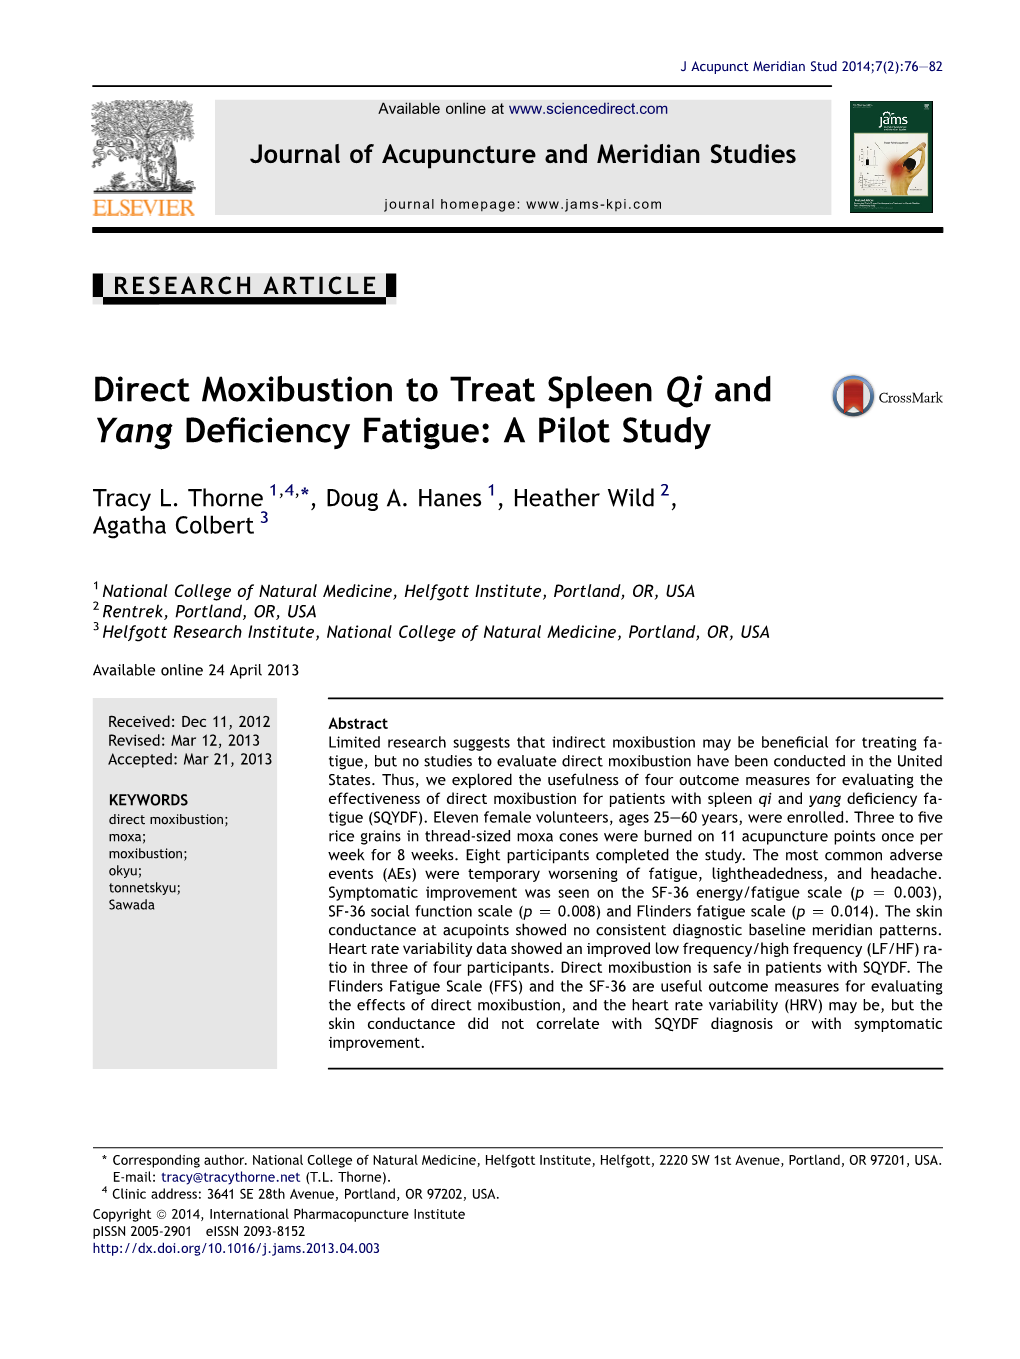 Direct Moxibustion to Treat Spleen Qi and Yang Deficiency Fatigue